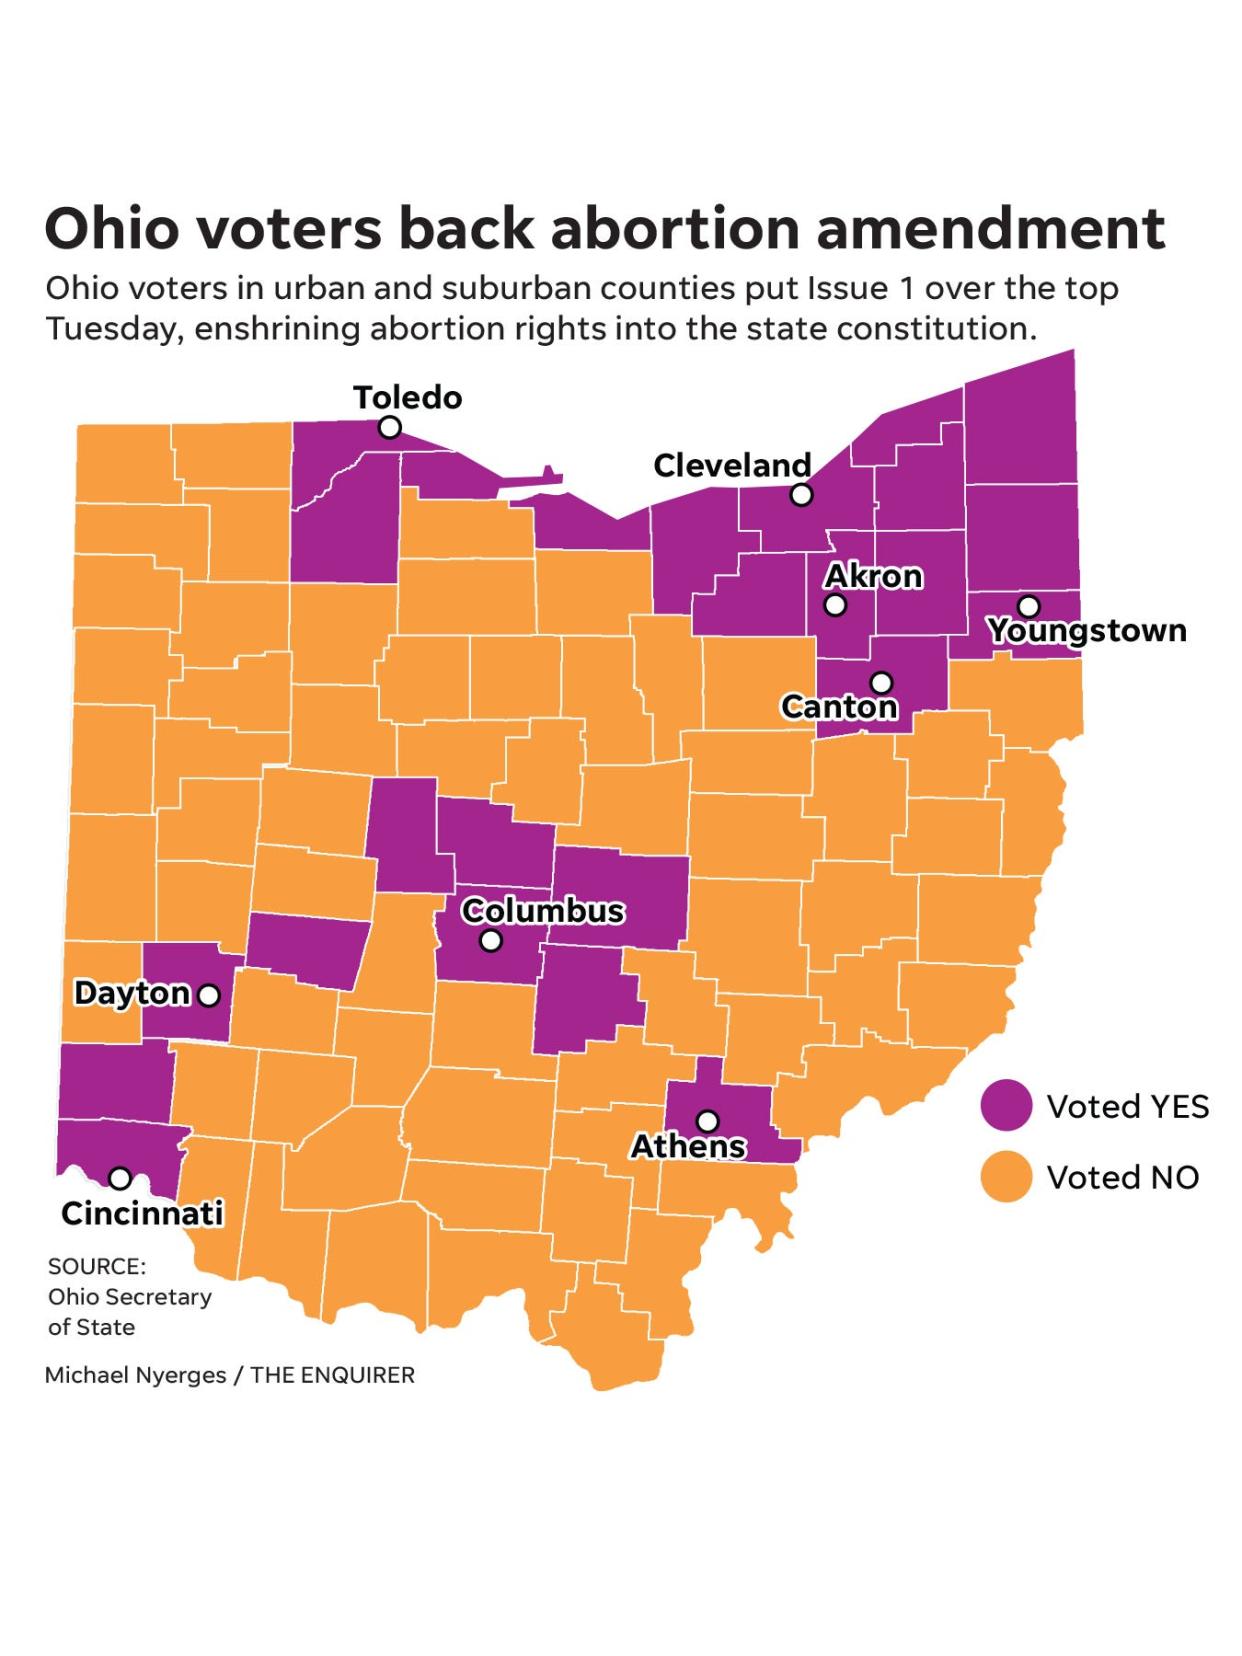 Ohio Issue 1 results